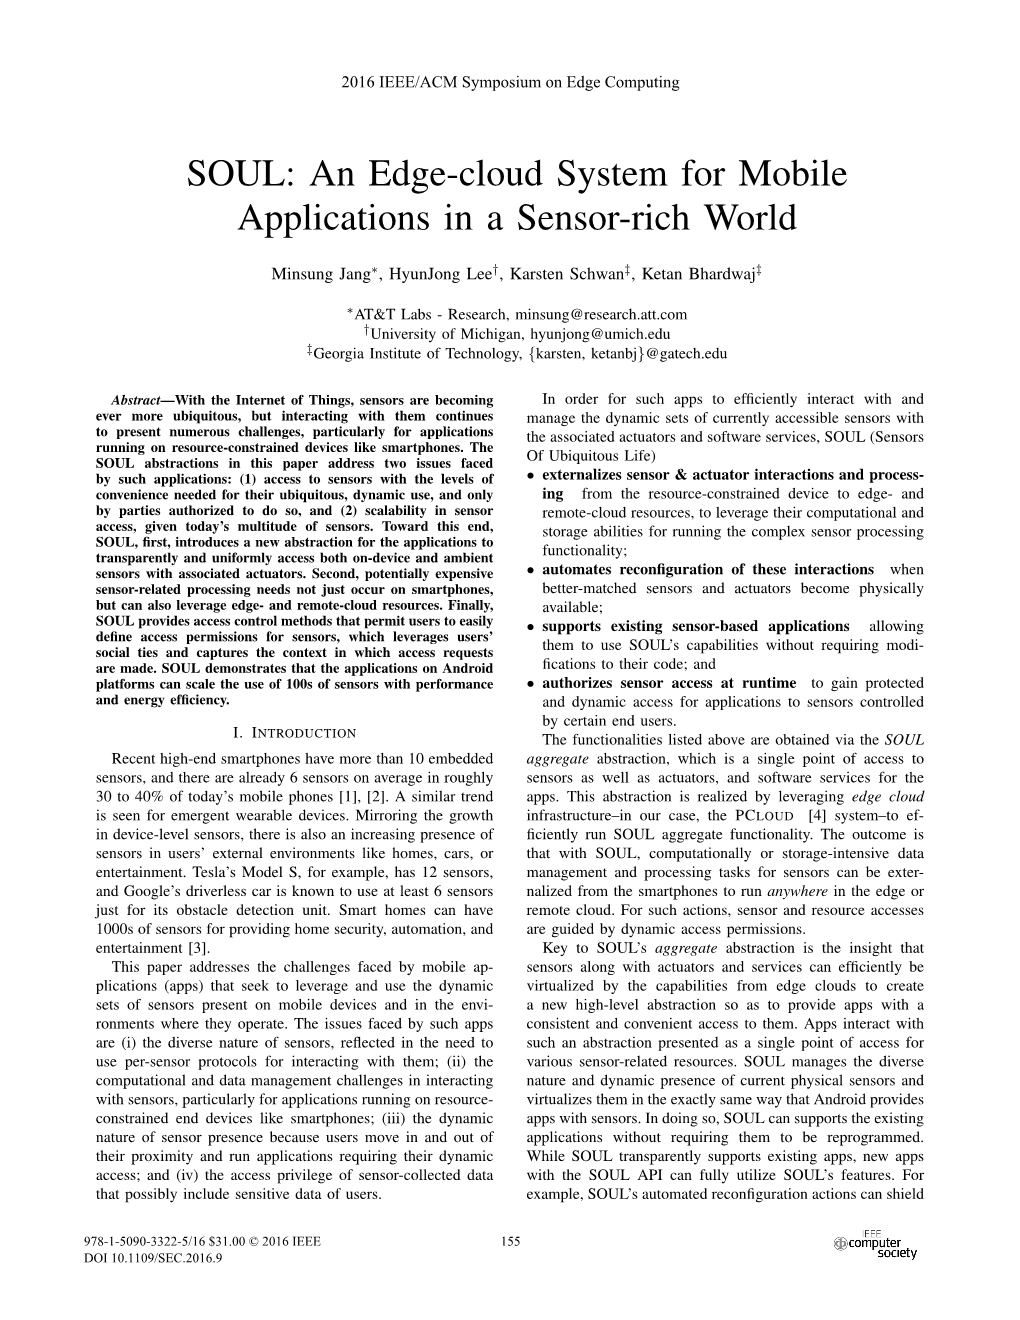 SOUL: an Edge-Cloud System for Mobile Applications in a Sensor-Rich World